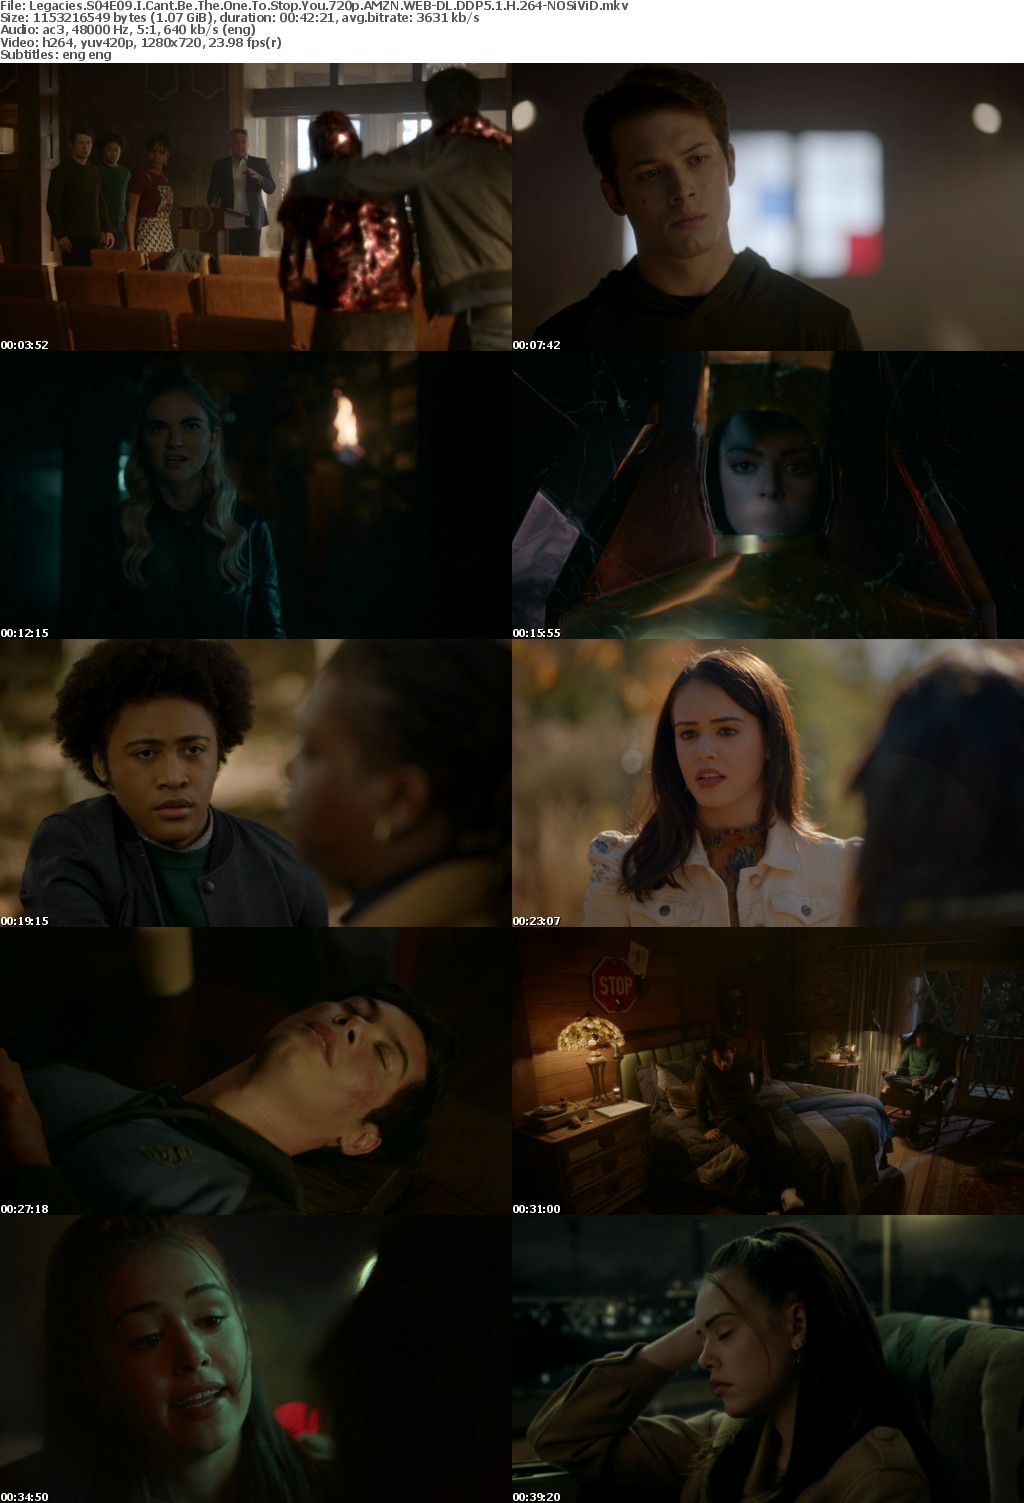 Legacies S04E09 I Cant Be The One To Stop You 720p AMZN WEBRip DDP5 1 x264-NOSiViD